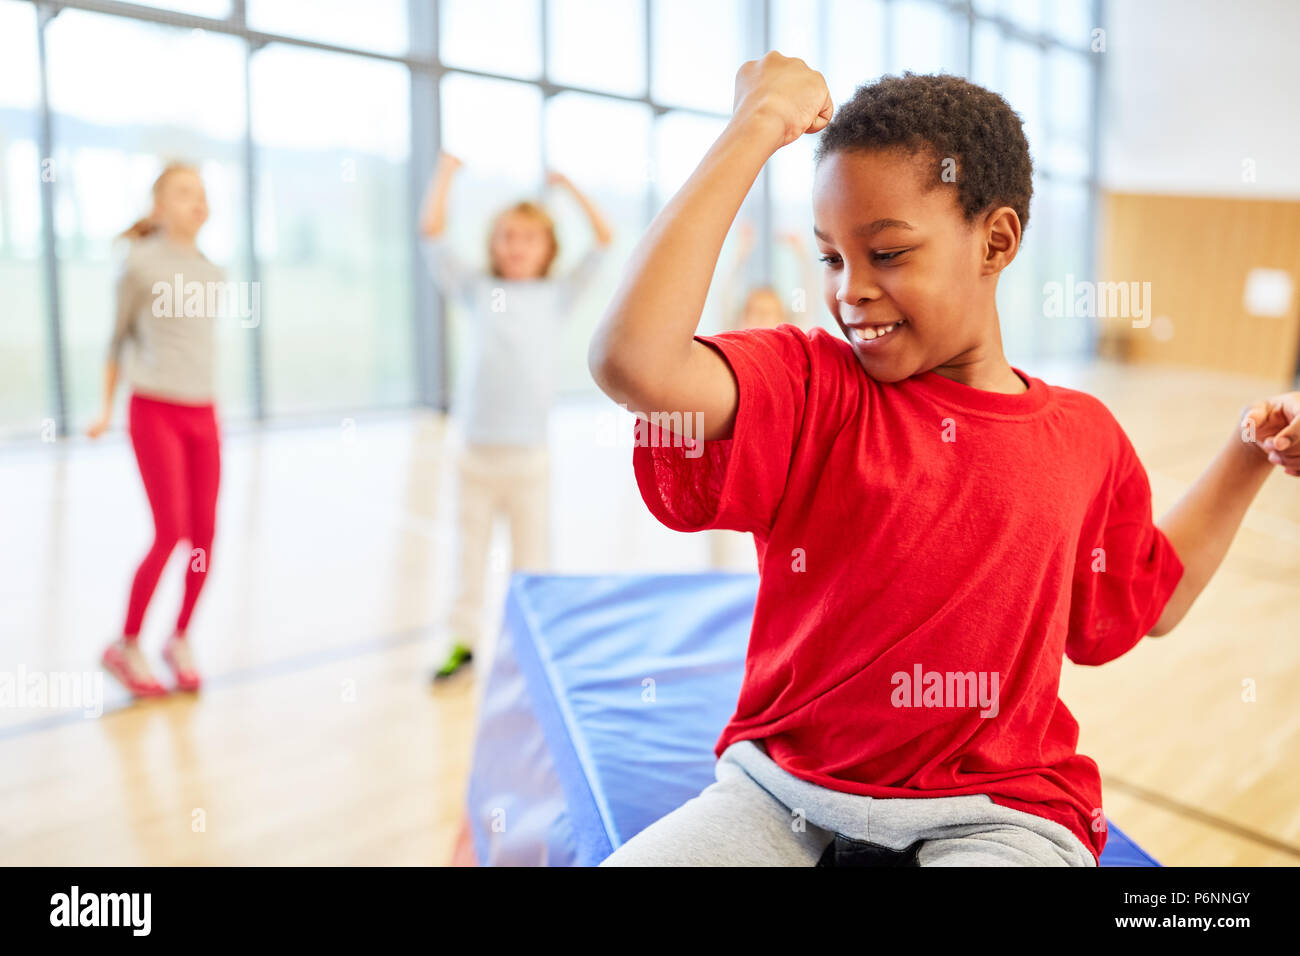 Sporty boy shows his muscles in elementary school physical education Stock Photo